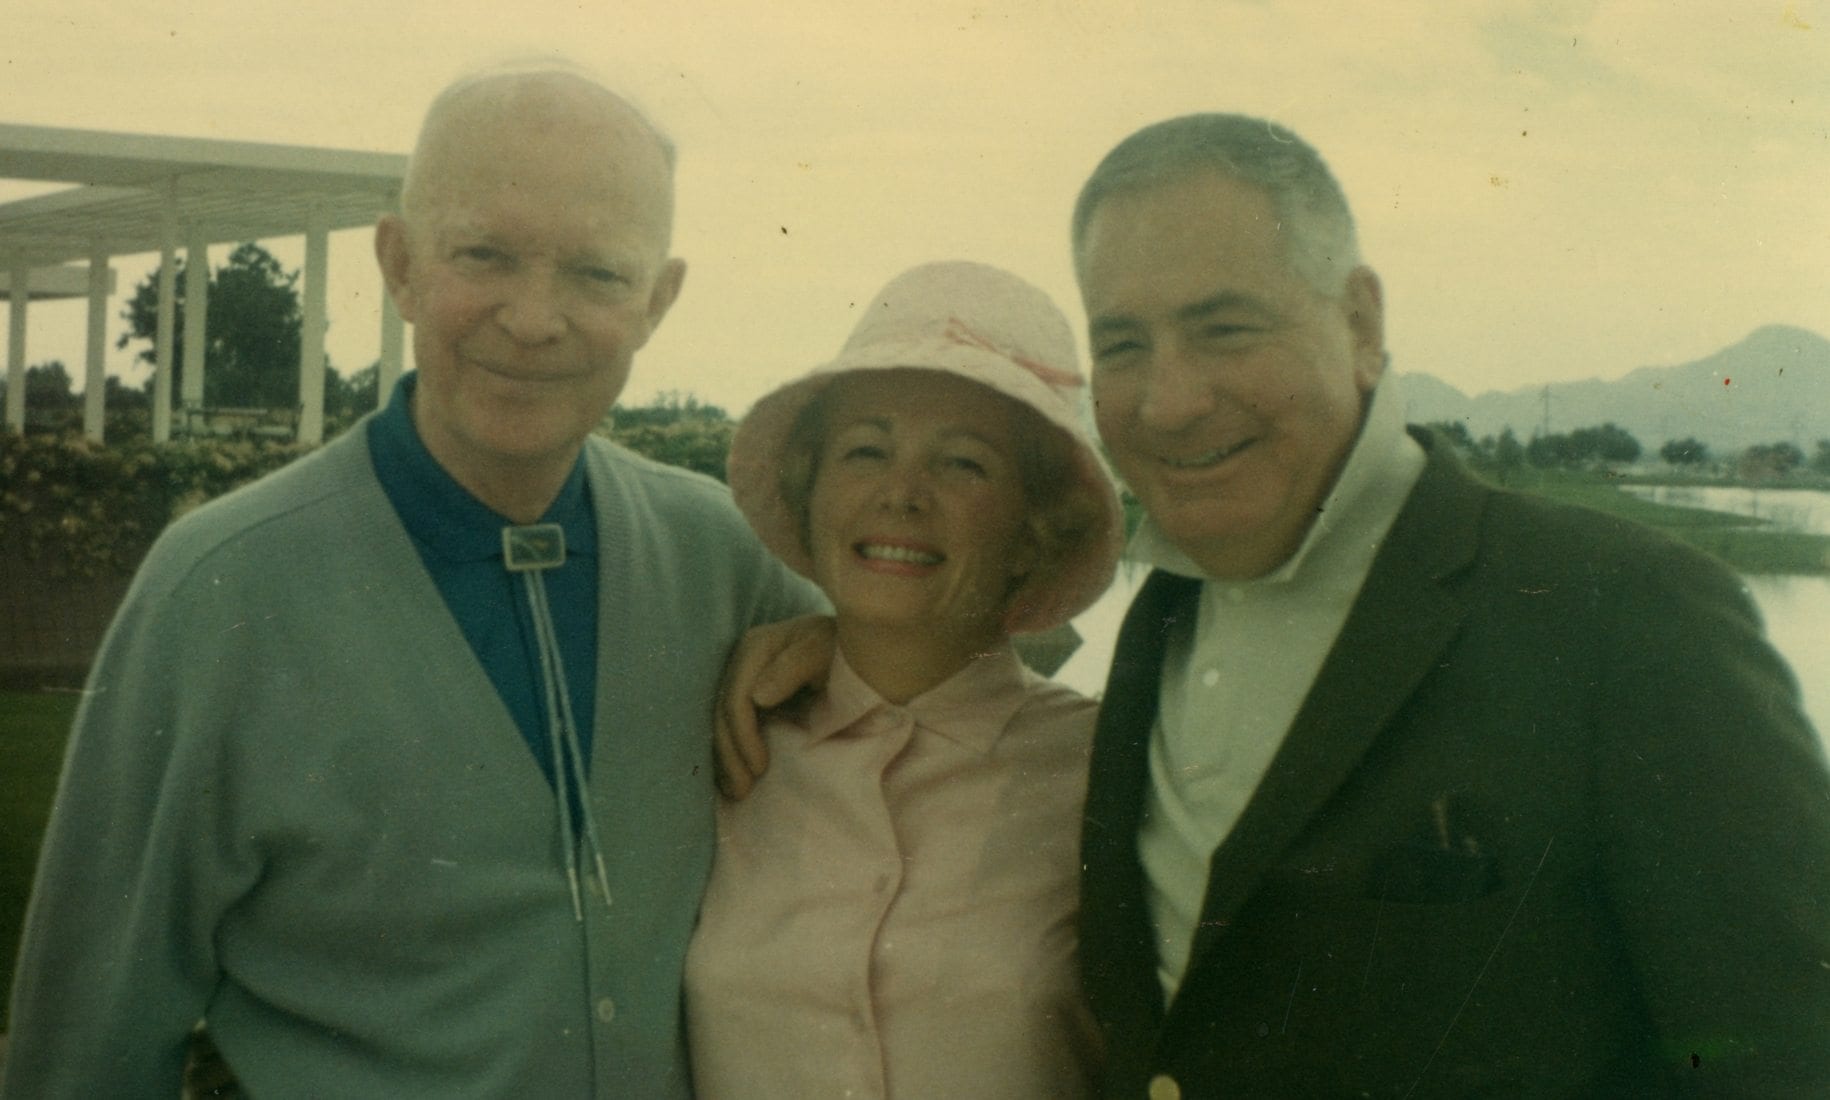 Three elderly individuals standing together outdoors, with a woman in the middle wearing a pink shirt and a wide-brimmed hat, flanked by two men in sweaters and jackets, with a gazebo and mountains in the background.